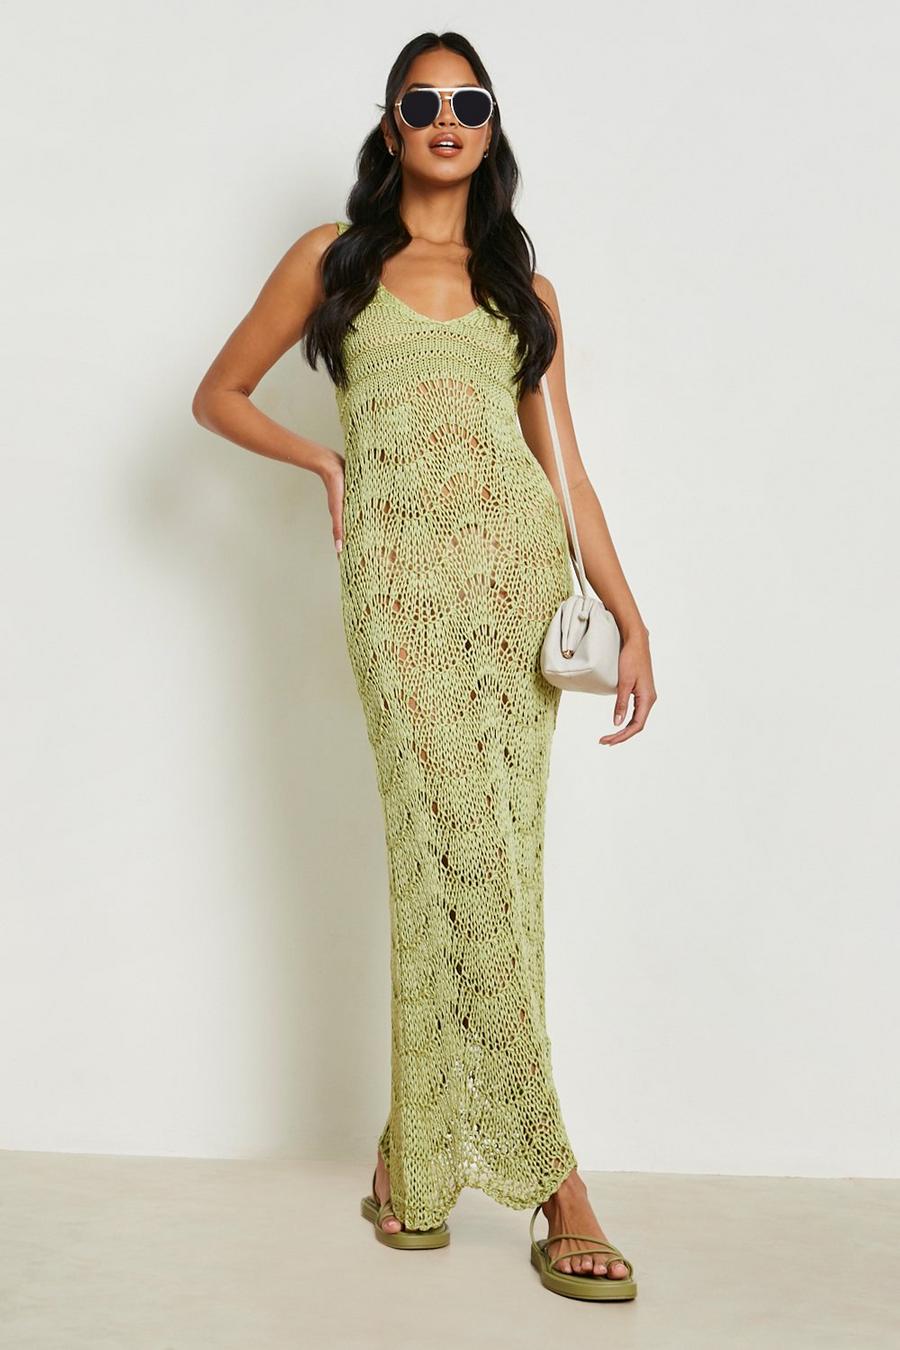 Washed lime yellow Crochet Scallop Scoop Beach Dress